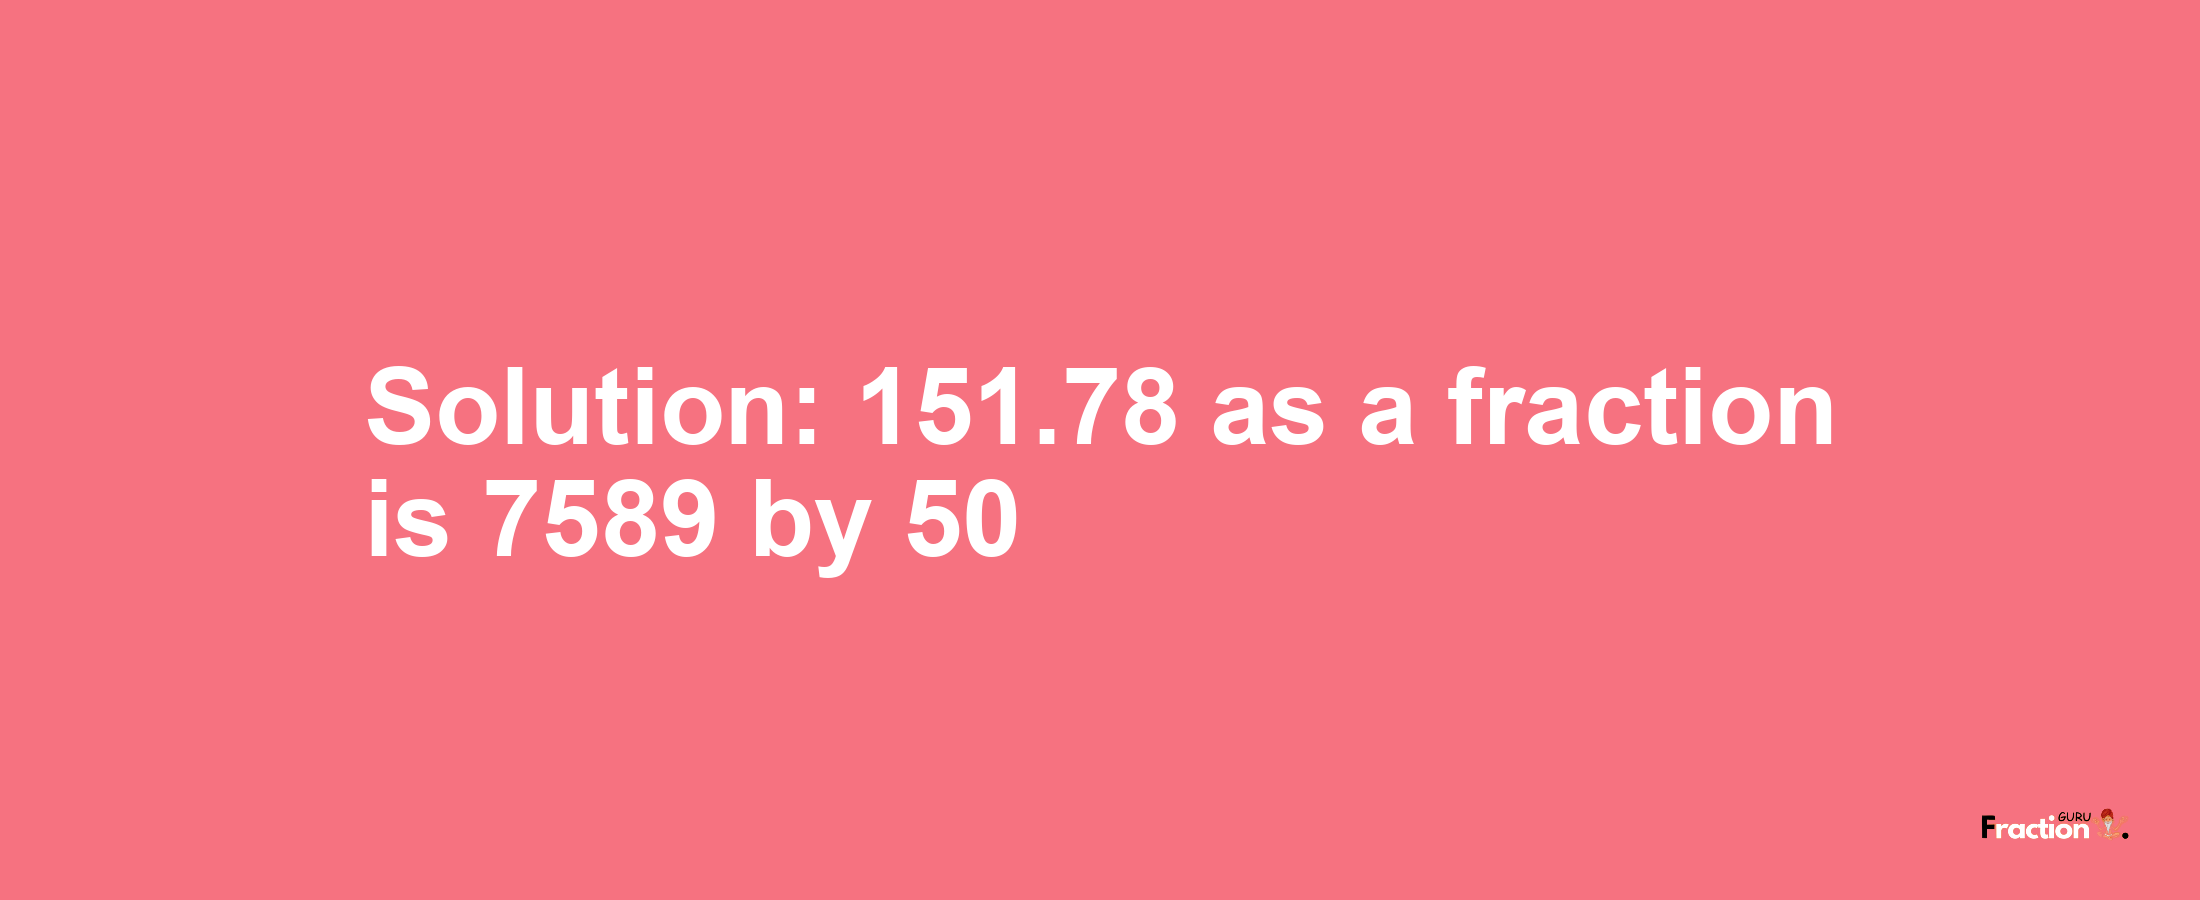 Solution:151.78 as a fraction is 7589/50